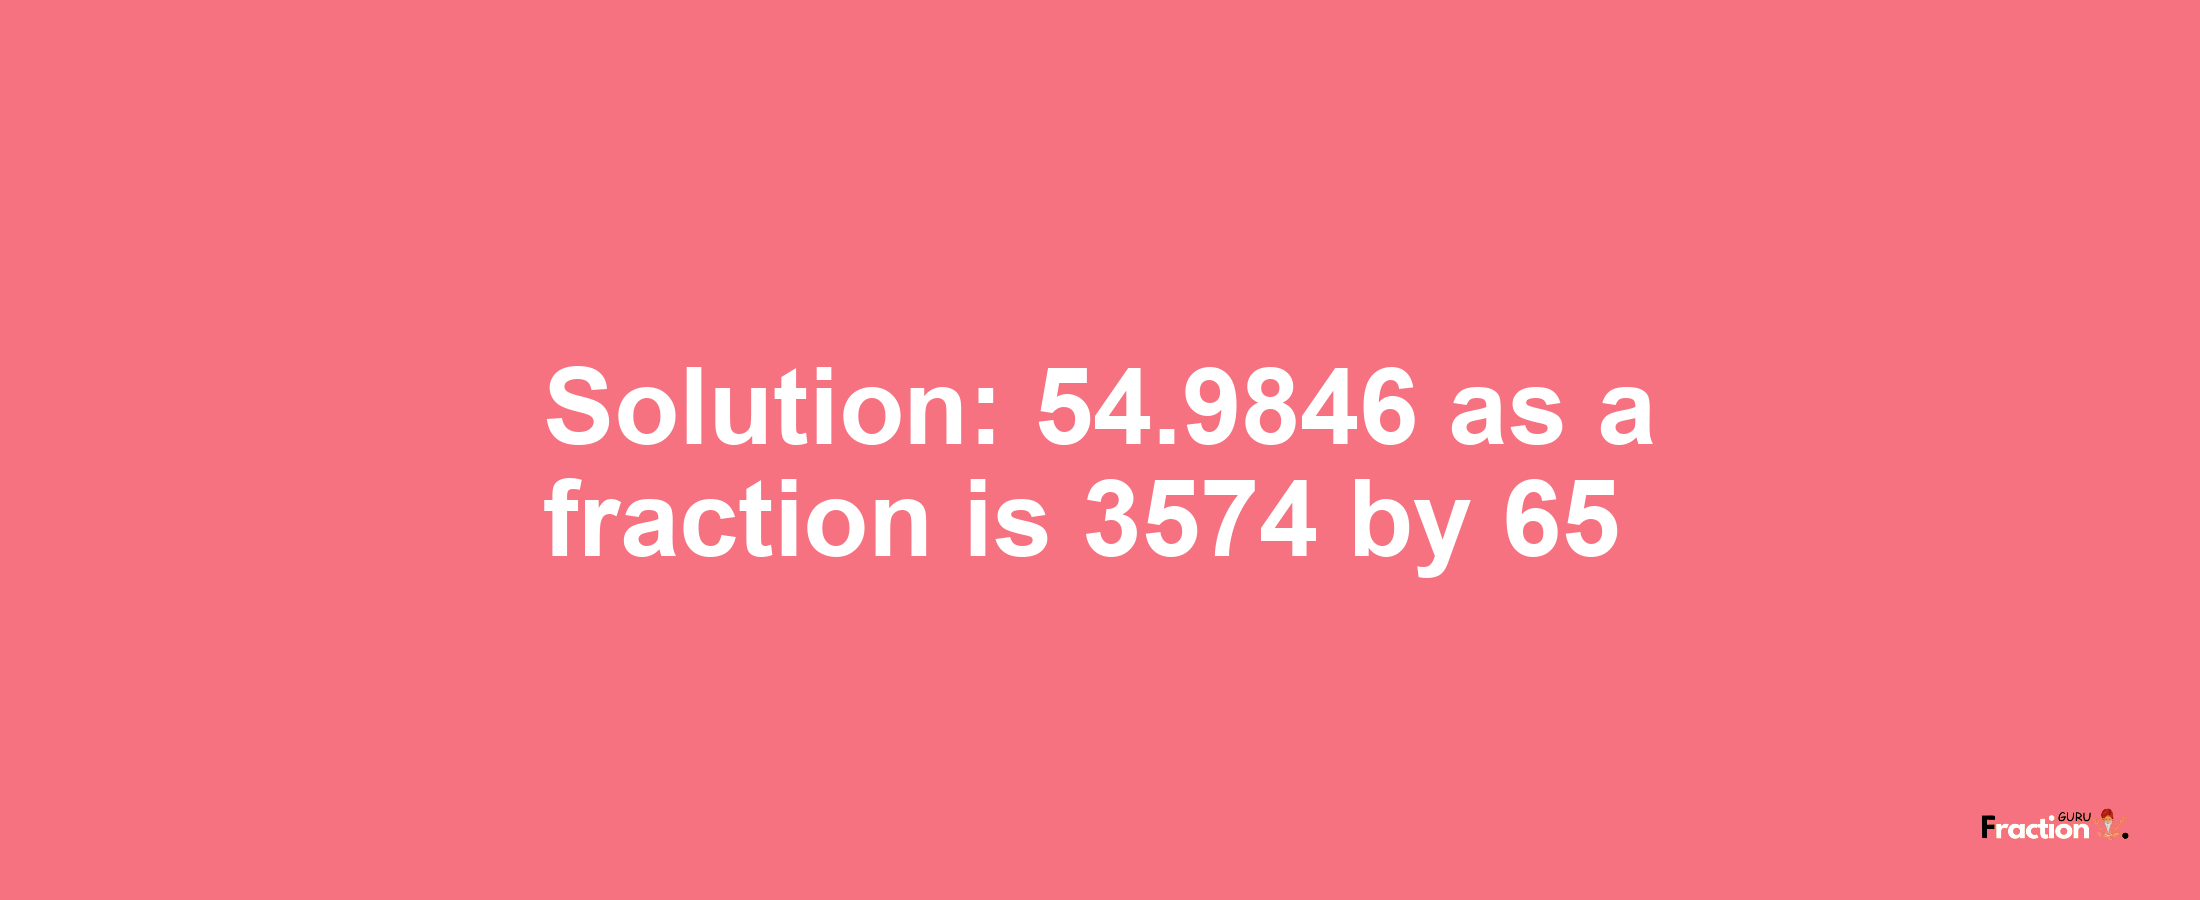 Solution:54.9846 as a fraction is 3574/65